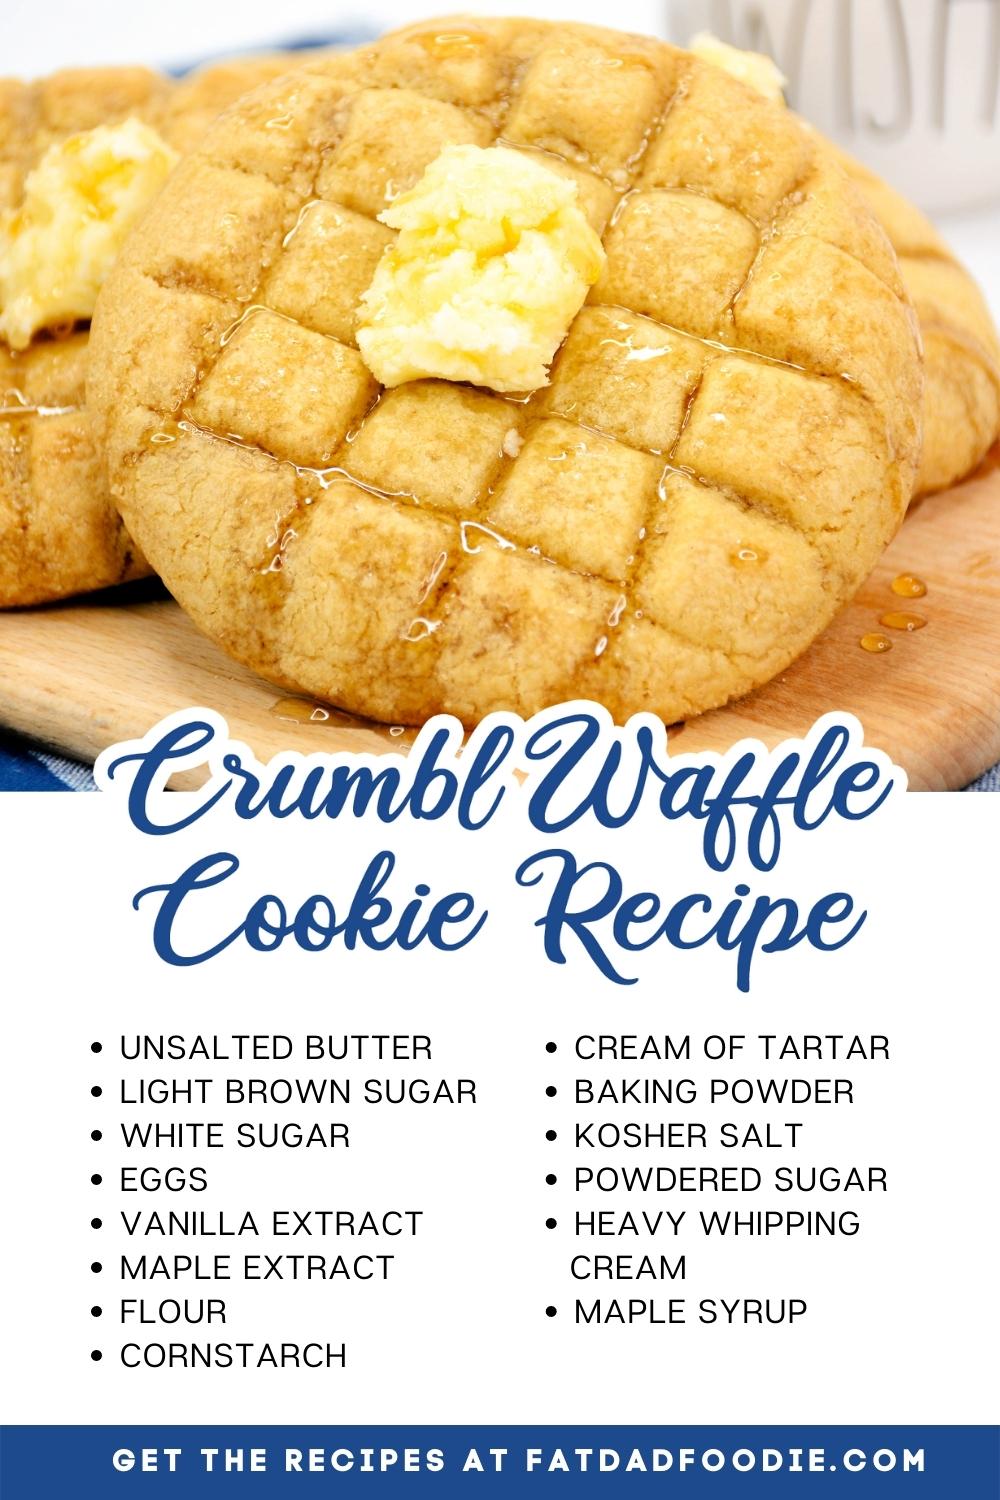 Crumble Waffle cookie recipe with ingredients